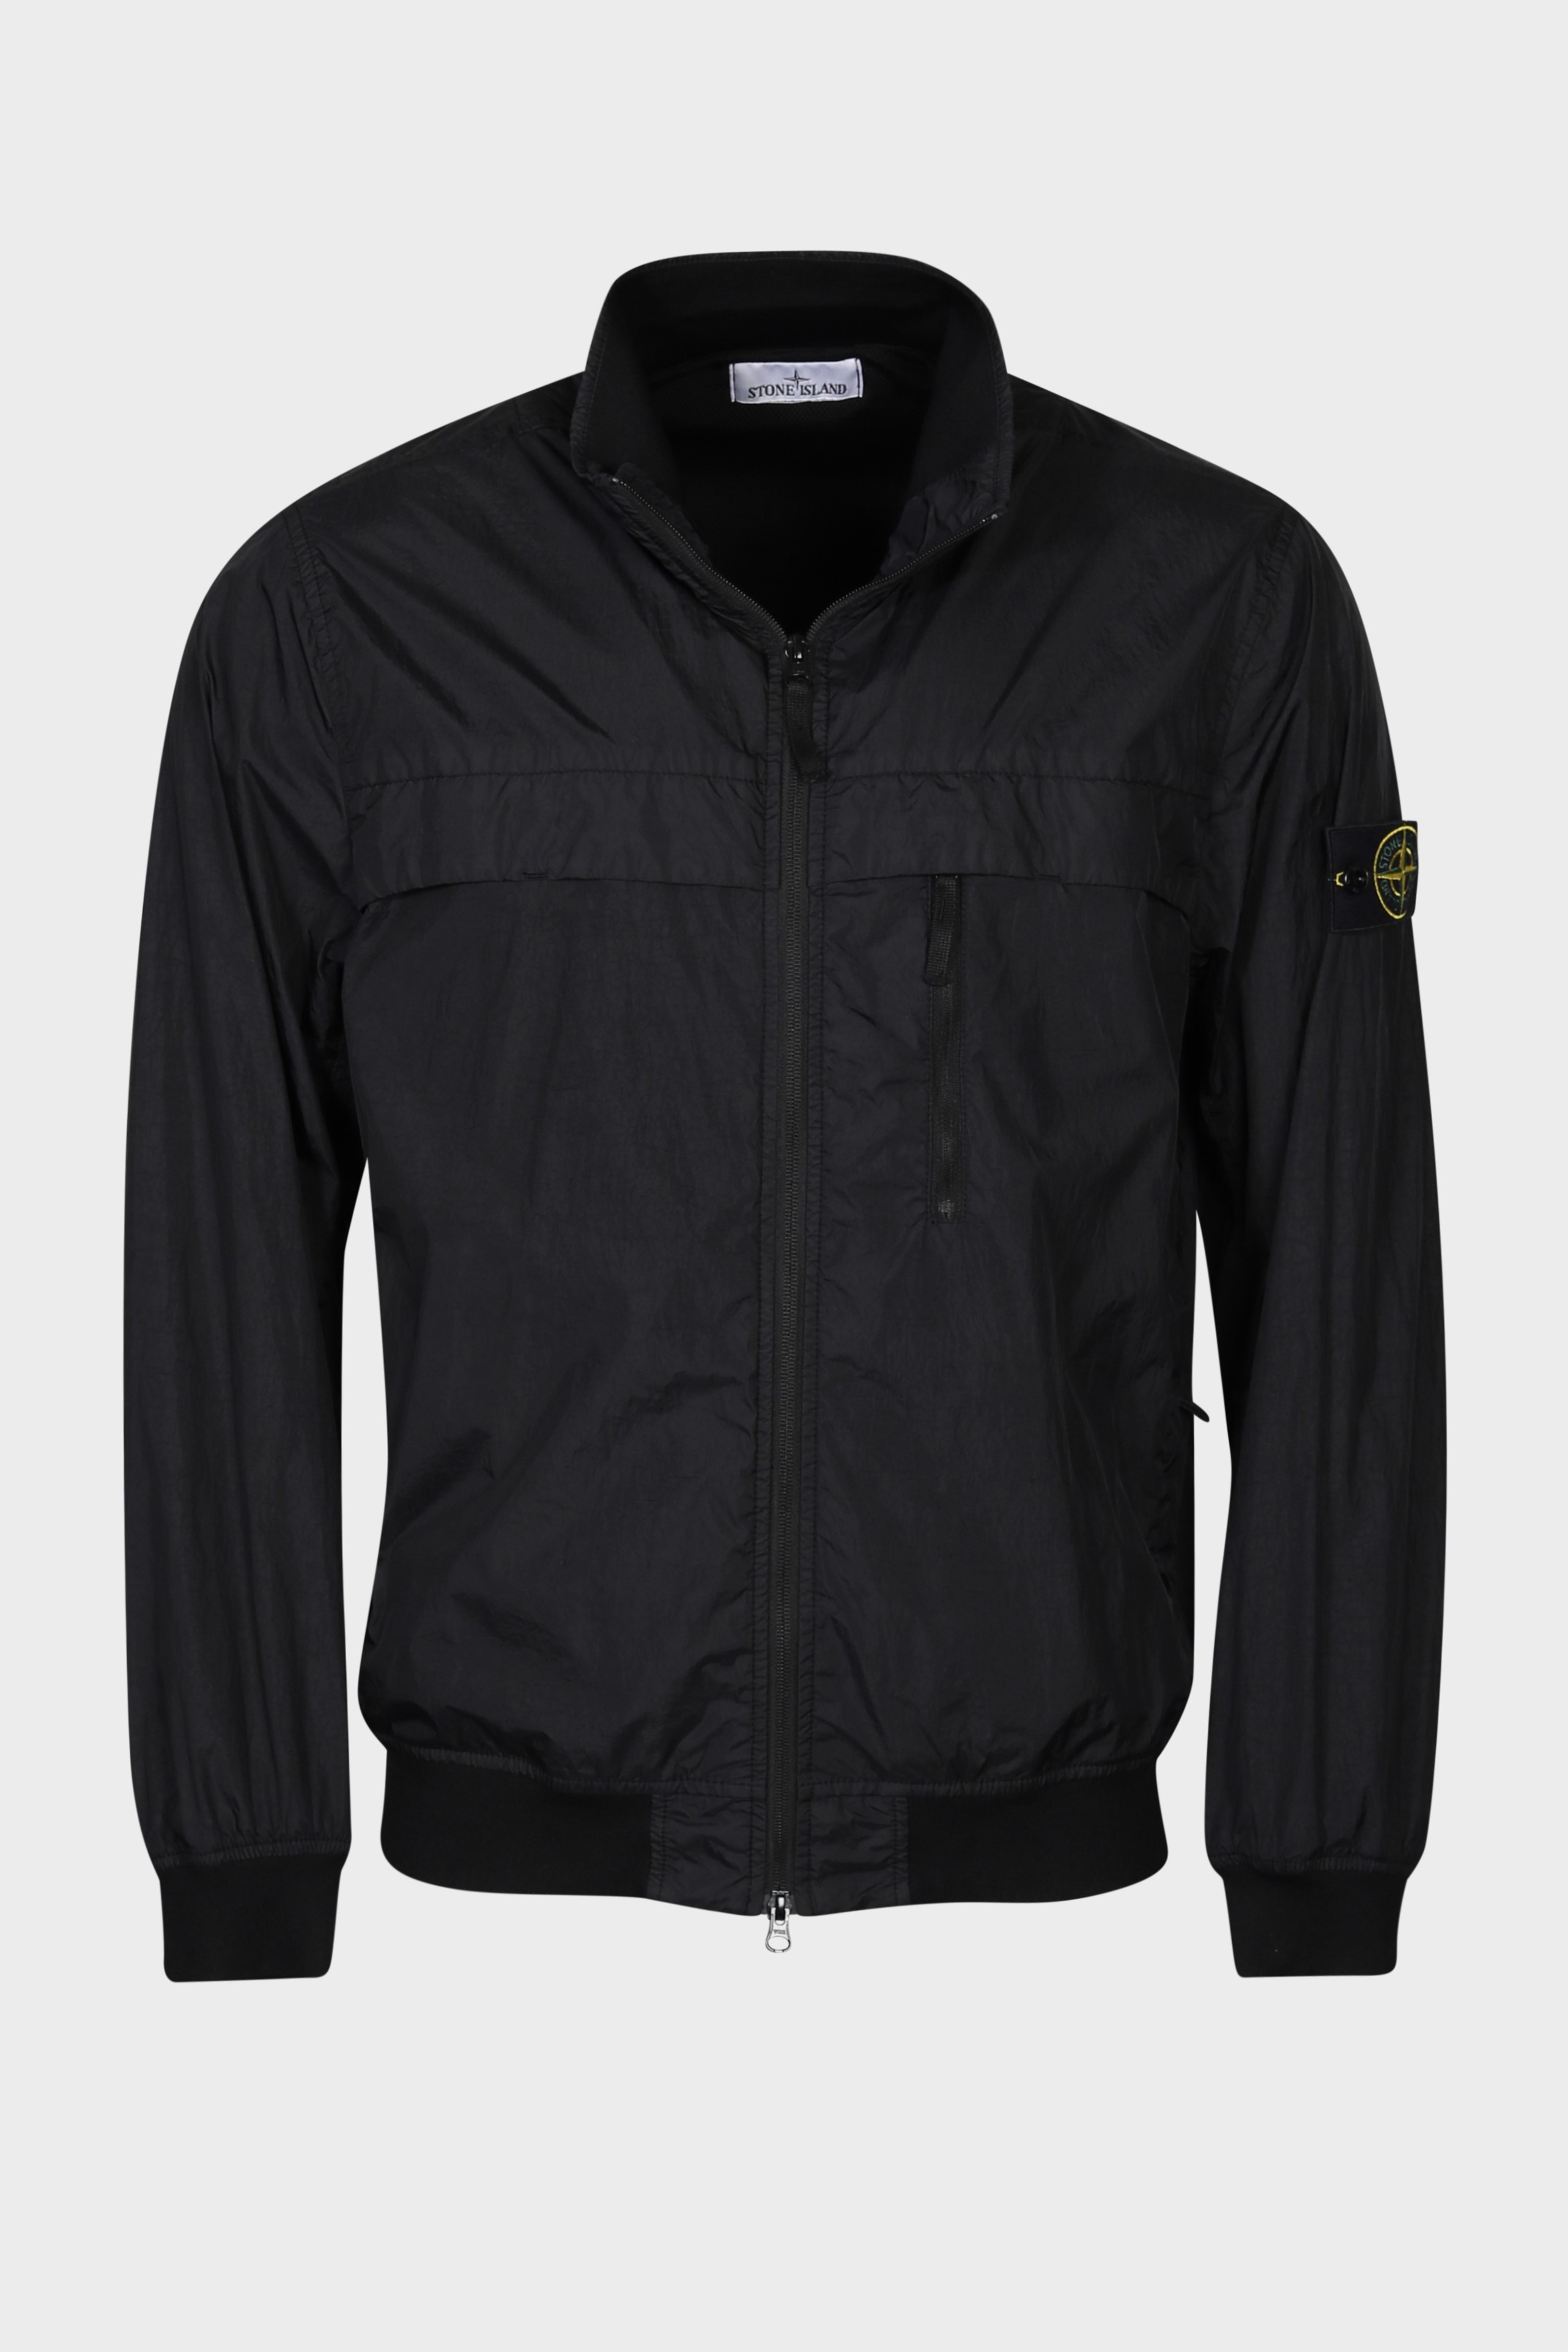 STONE ISLAND Garment Dyed Crinkle Reps Jacket in Black 3XL